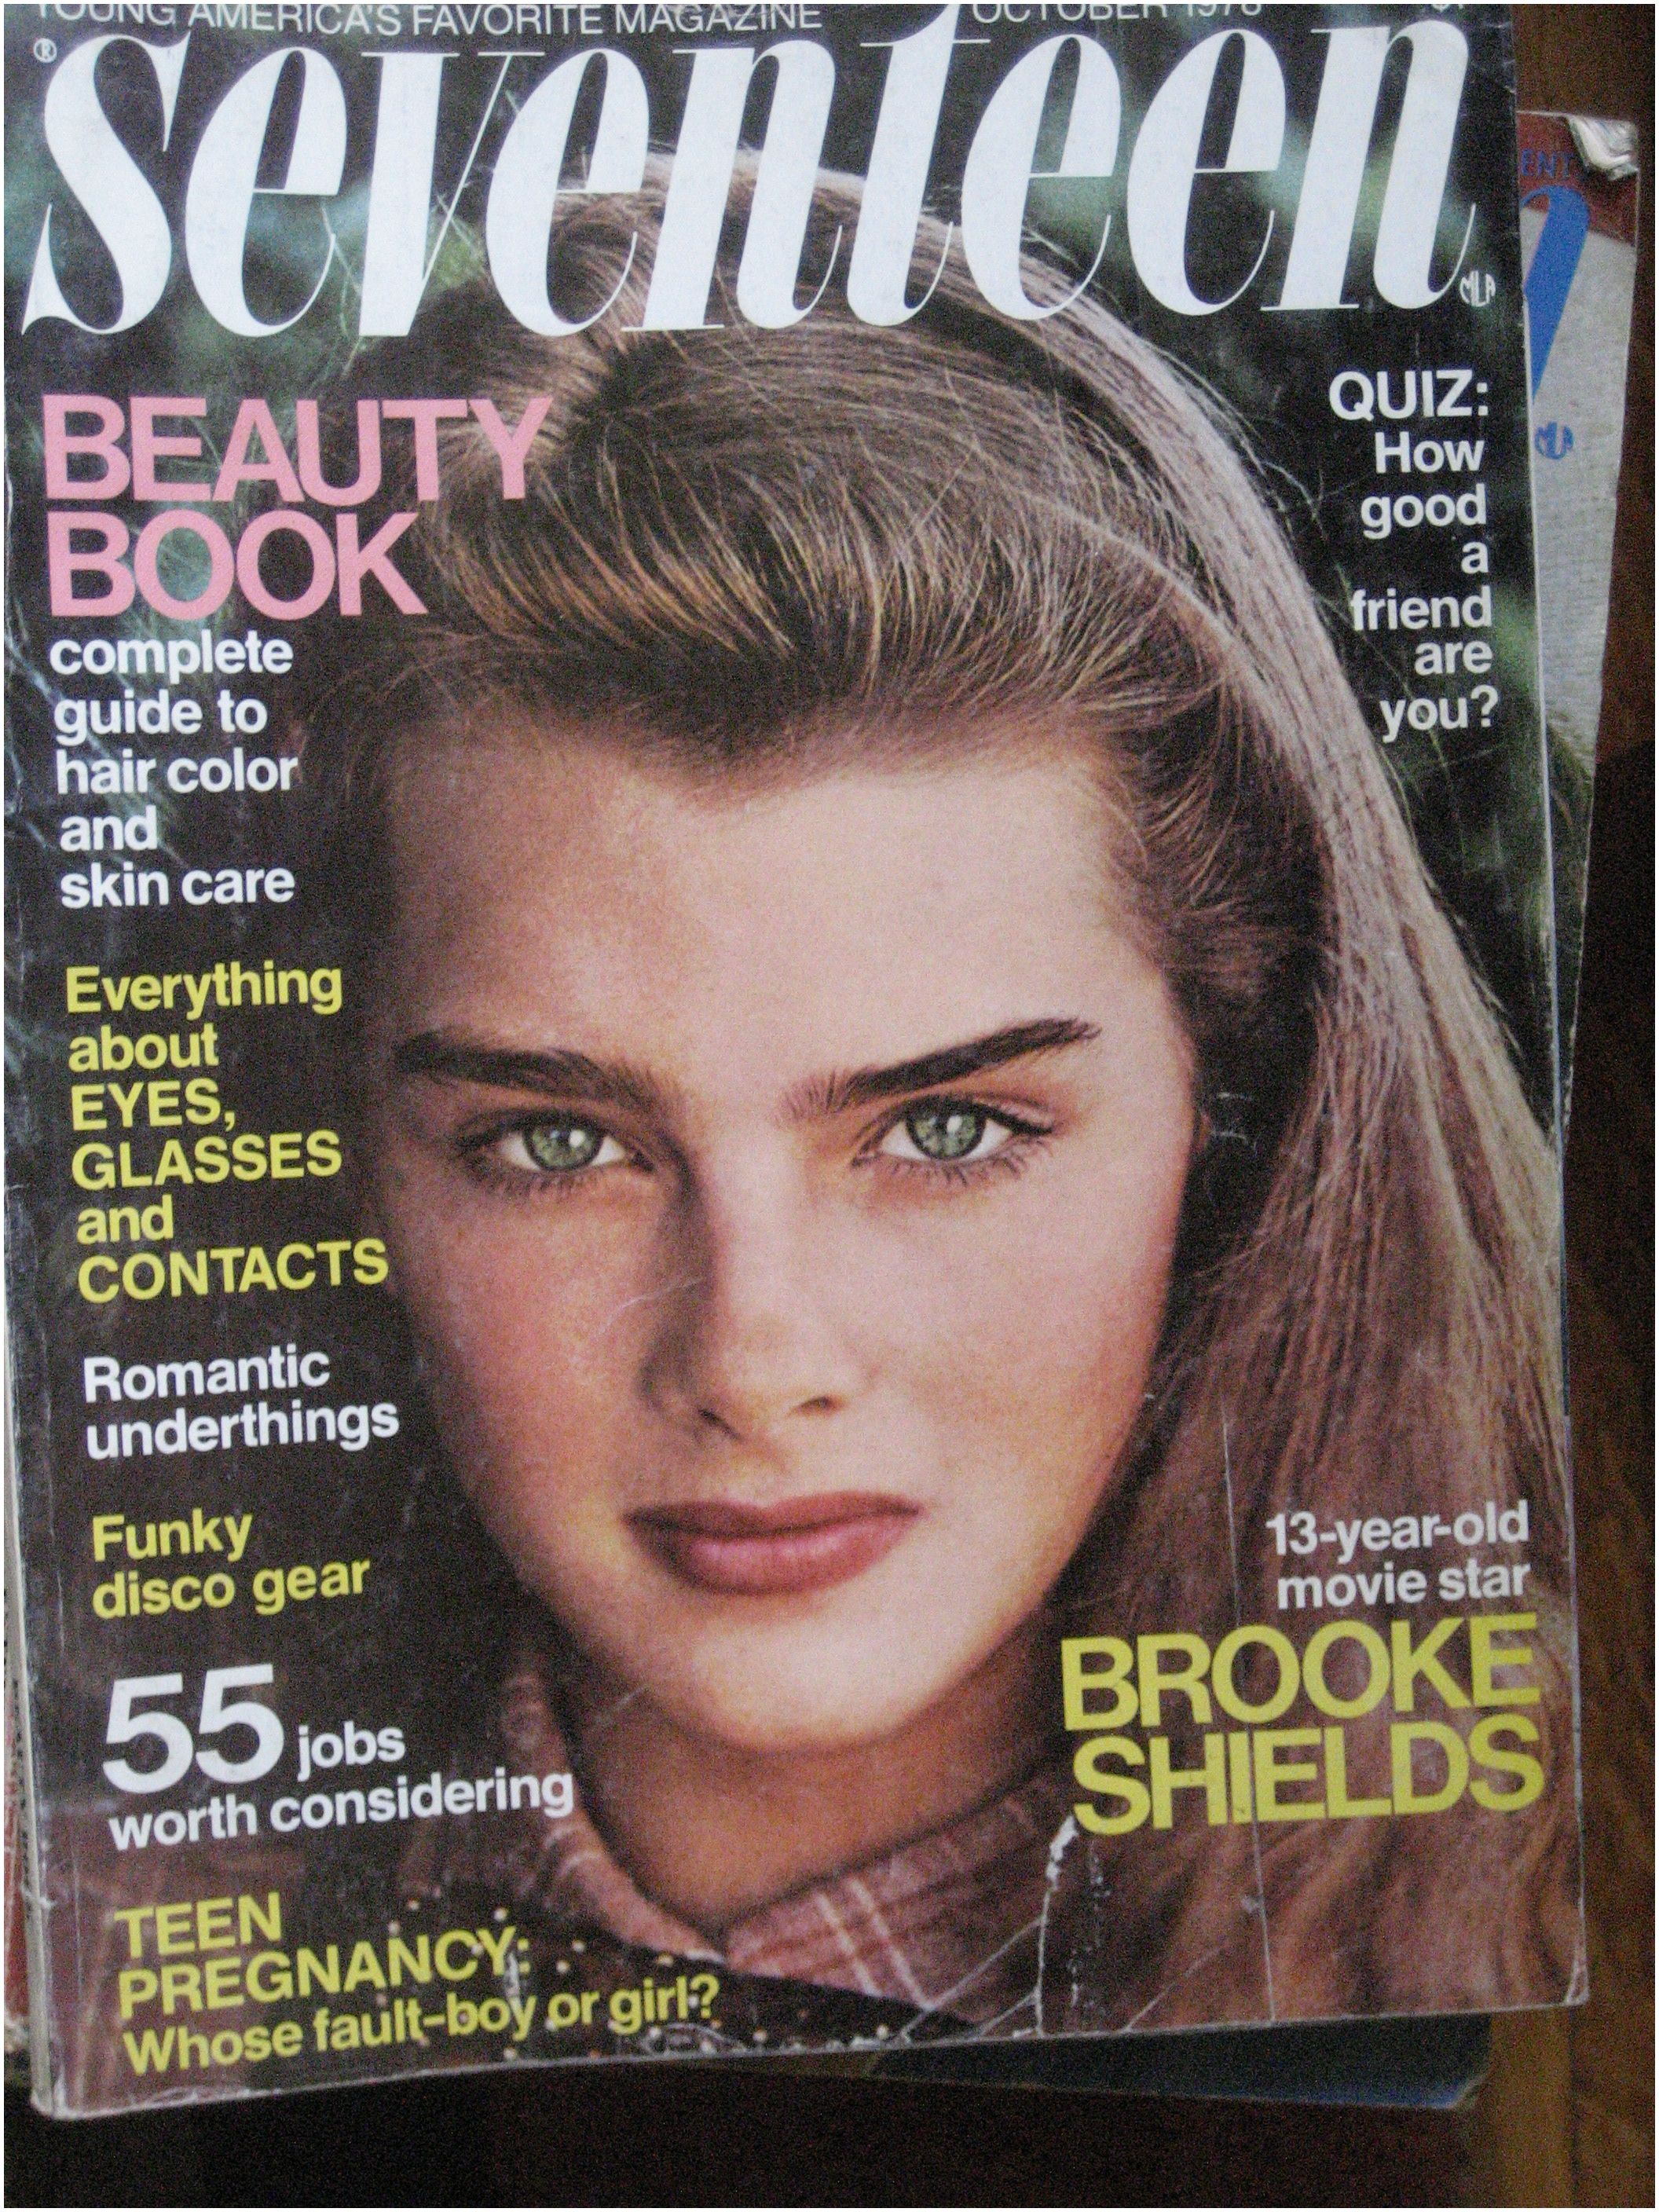 Magazines for 8 Year Olds October 1978 issue Of Seventeen Magazine with Brooke Shields On